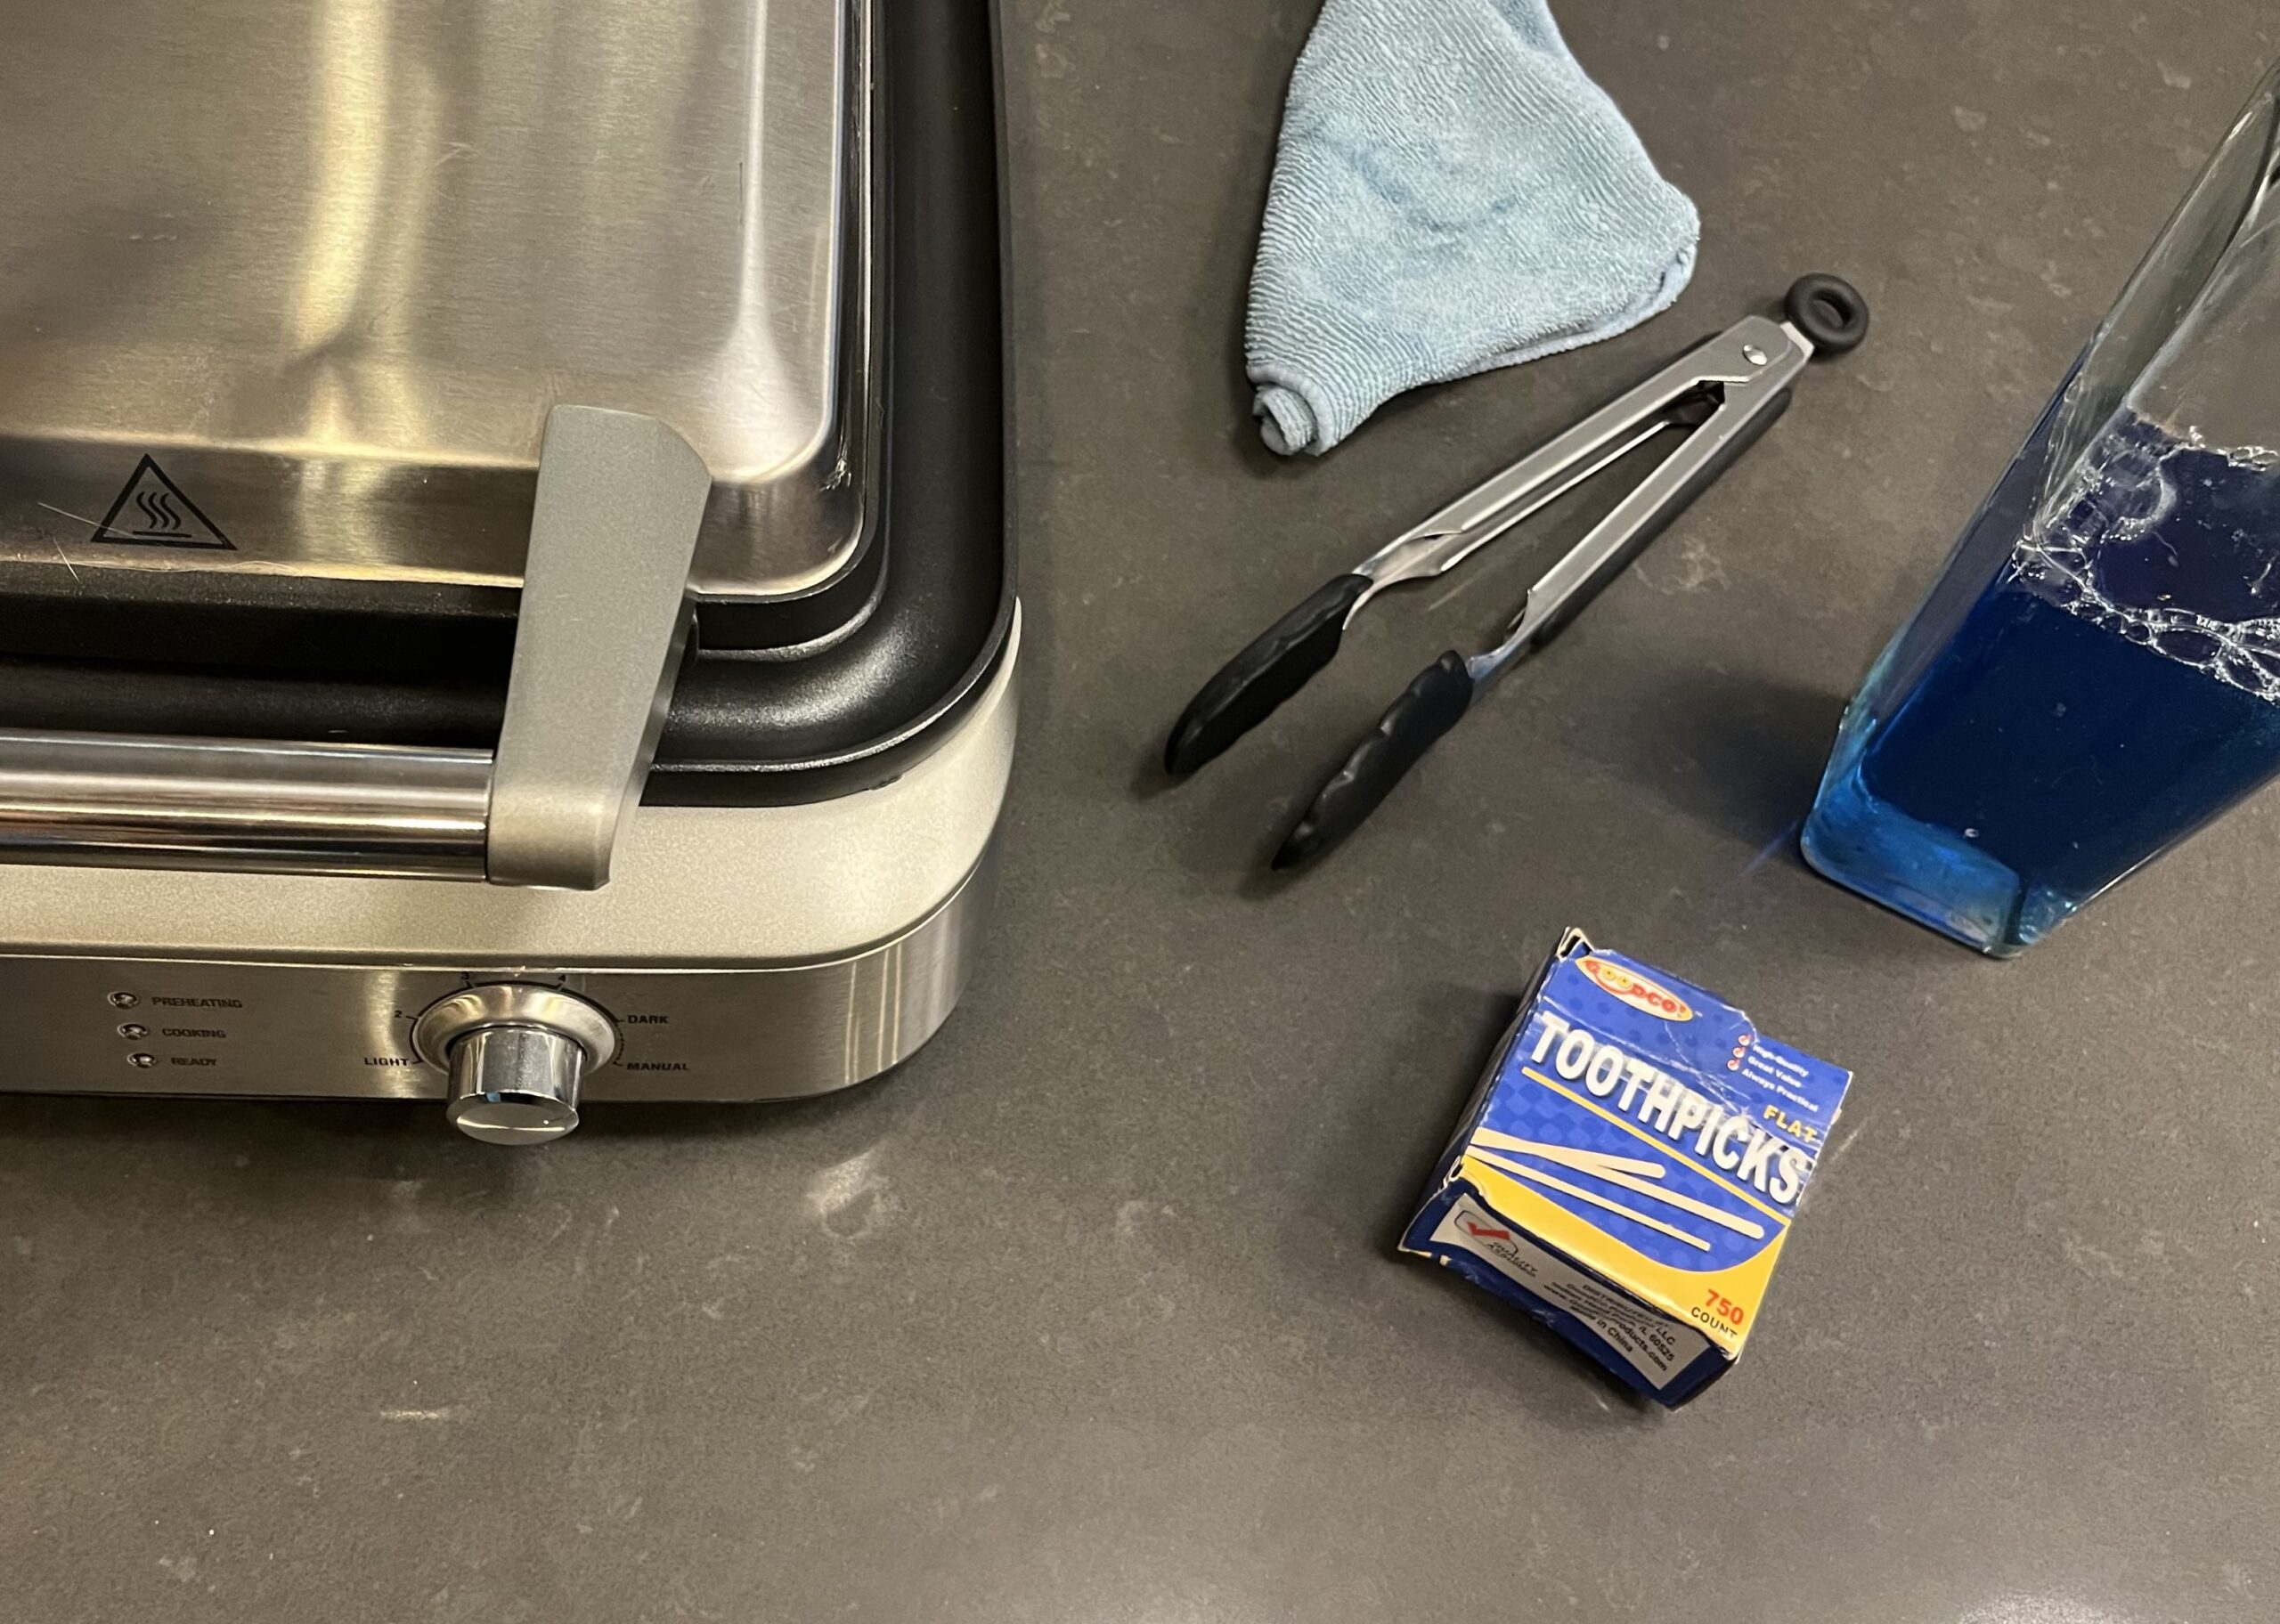 Stainless Breville waffle maker and cleaning supplies on kitchen counter.